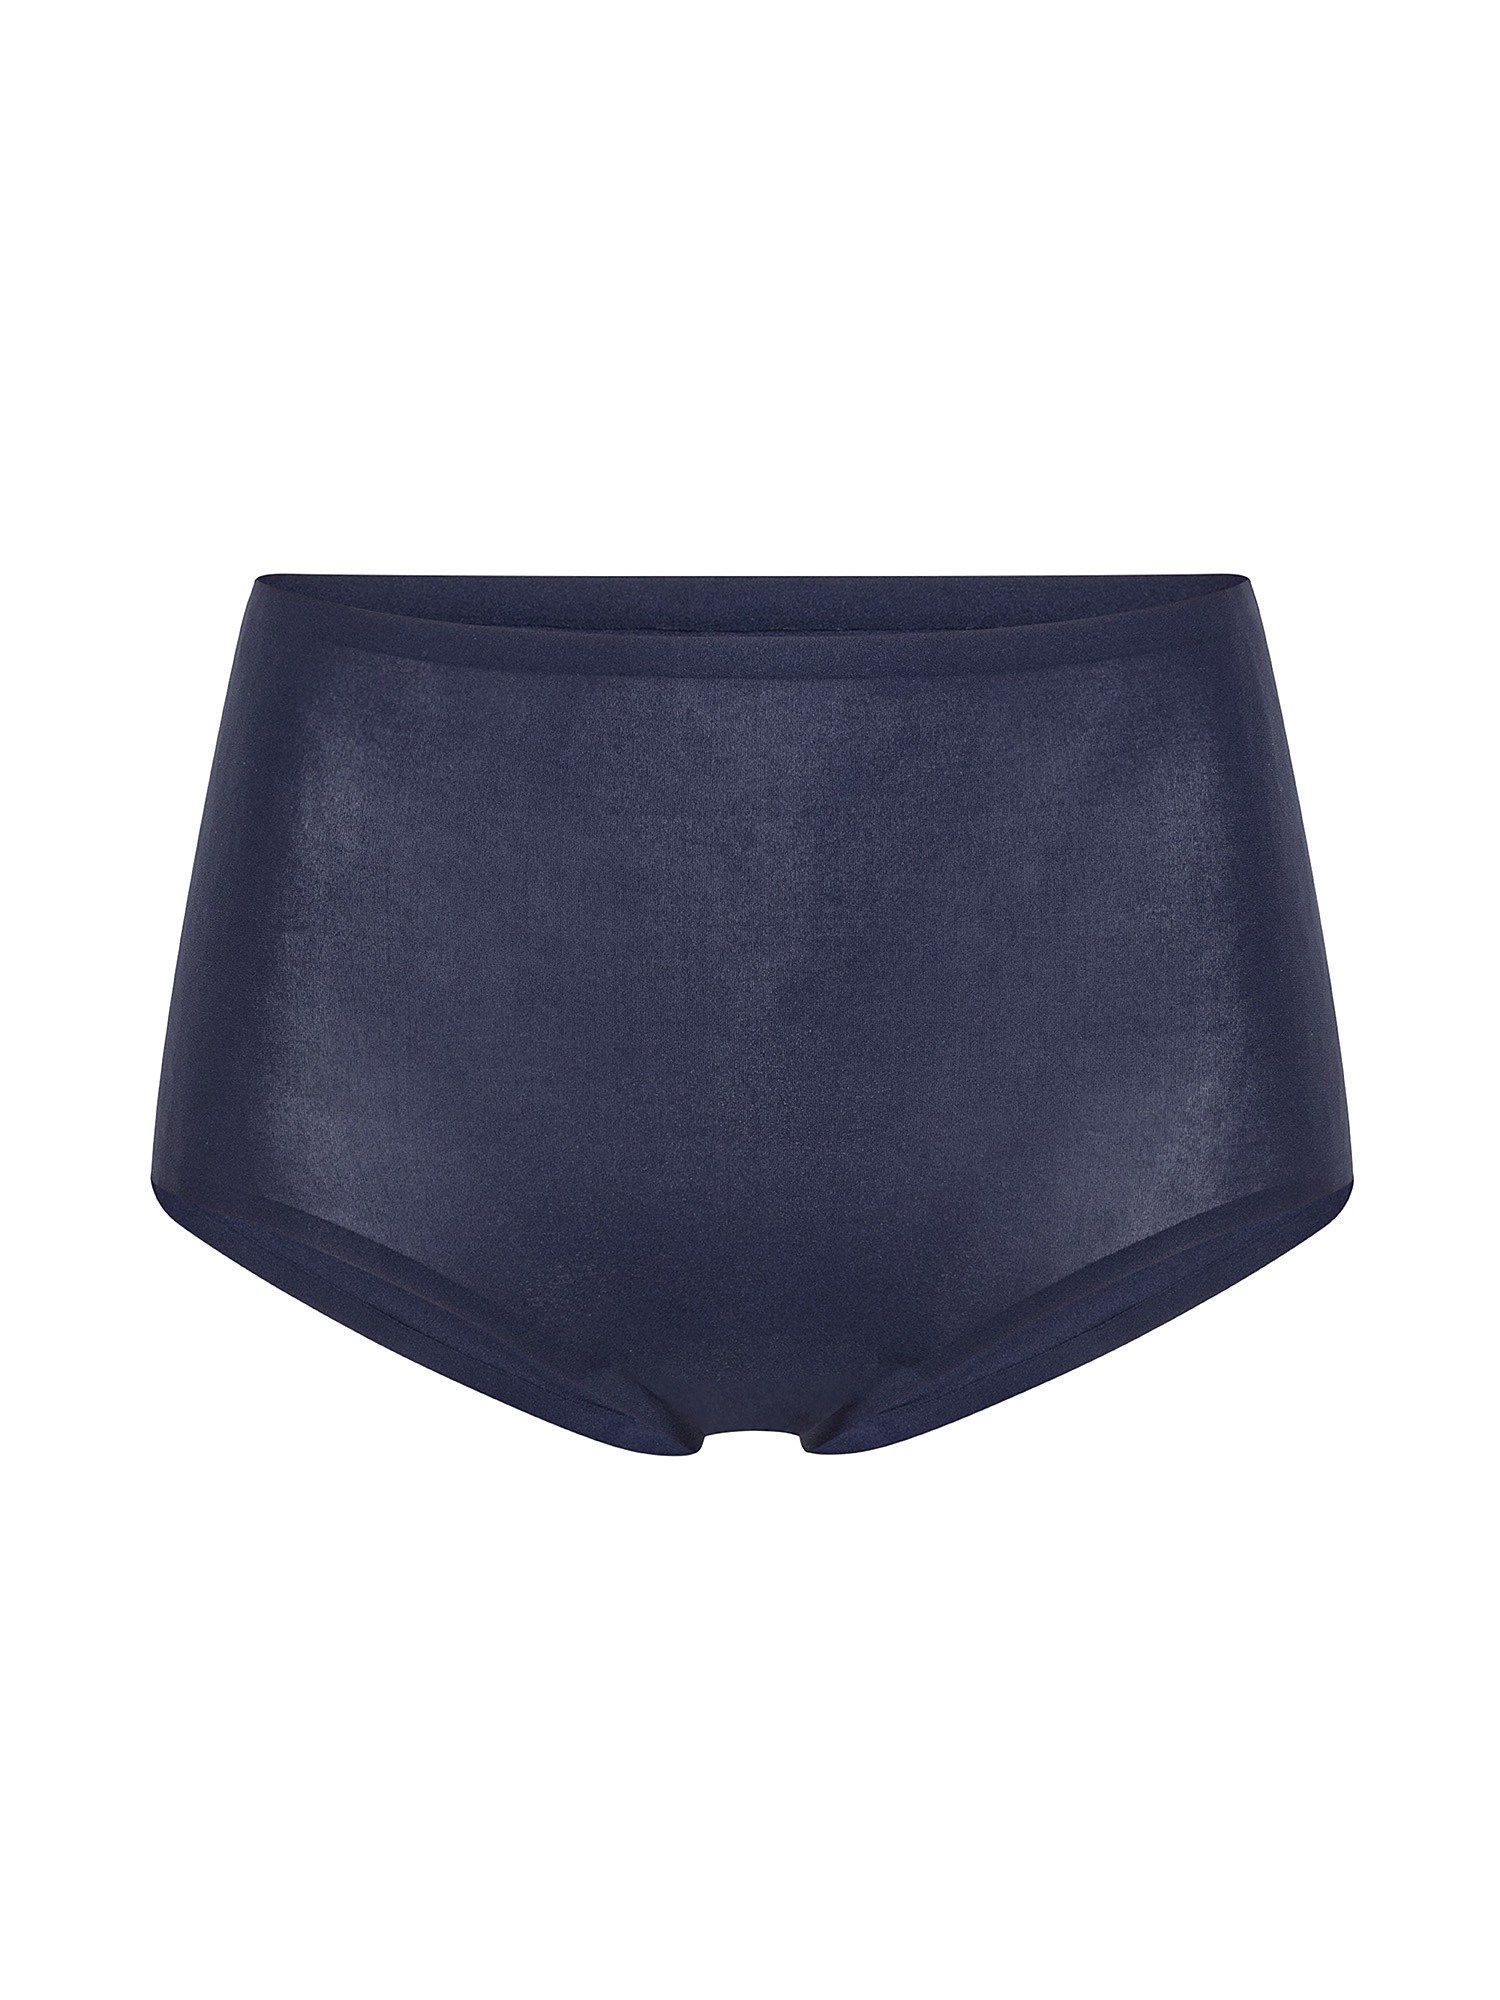 High-waisted culottes, Dark Blue, large image number 0